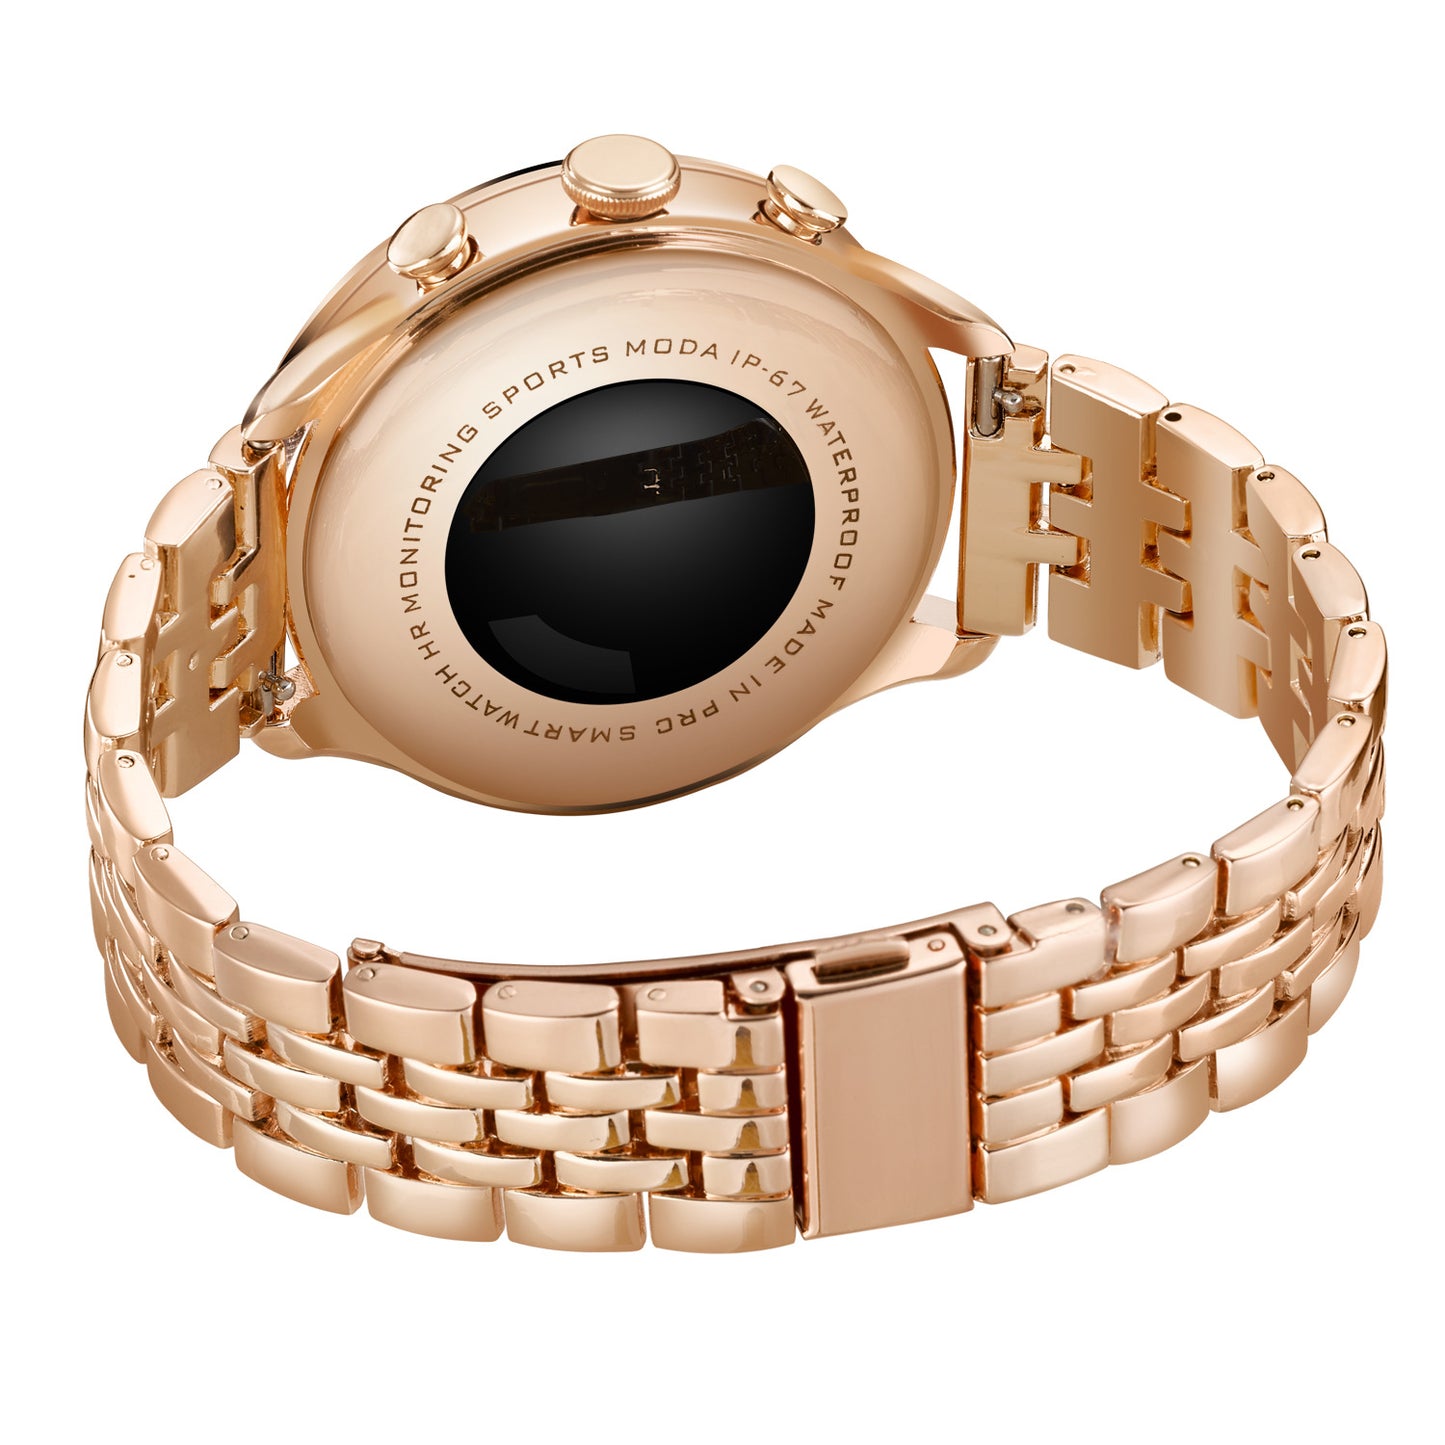 Golden Jewelled Fashionable Waterproof Ladies Smart Watch with Bluetooth Calling ideal for Gifting